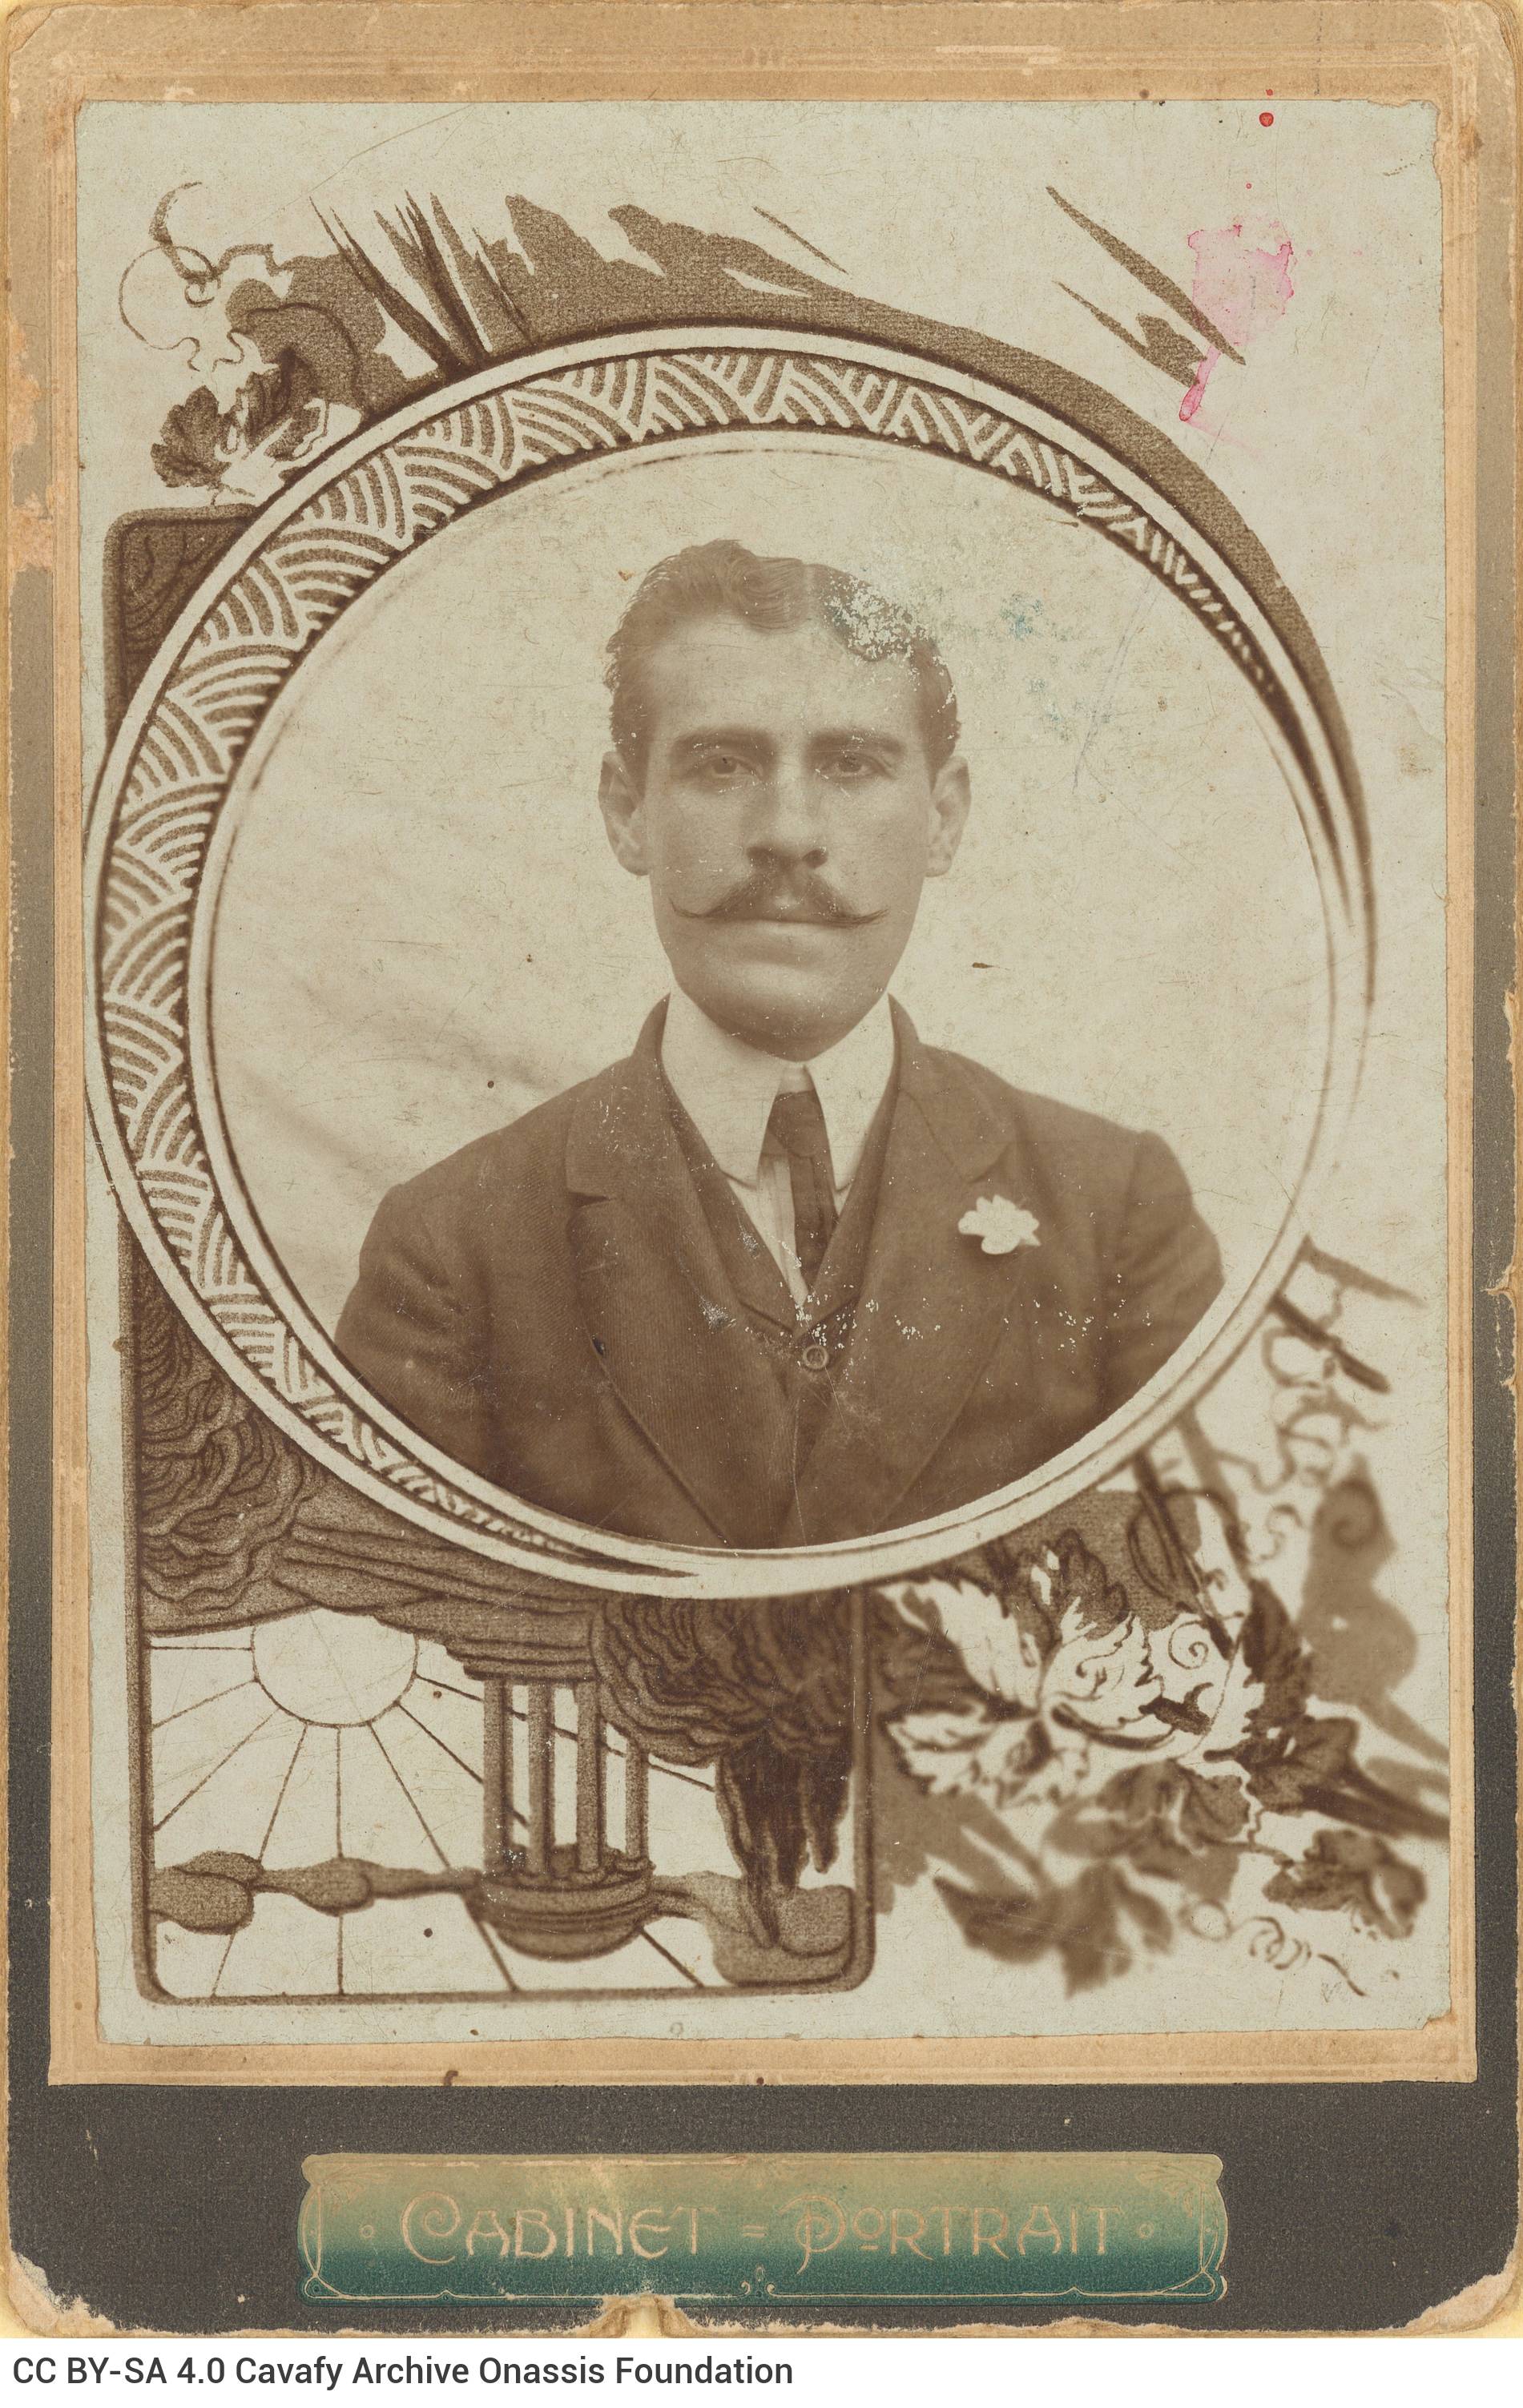 Photographic portrait of a young man with a moustache, wearing a suit. In the lower part of the recto, the printed indication